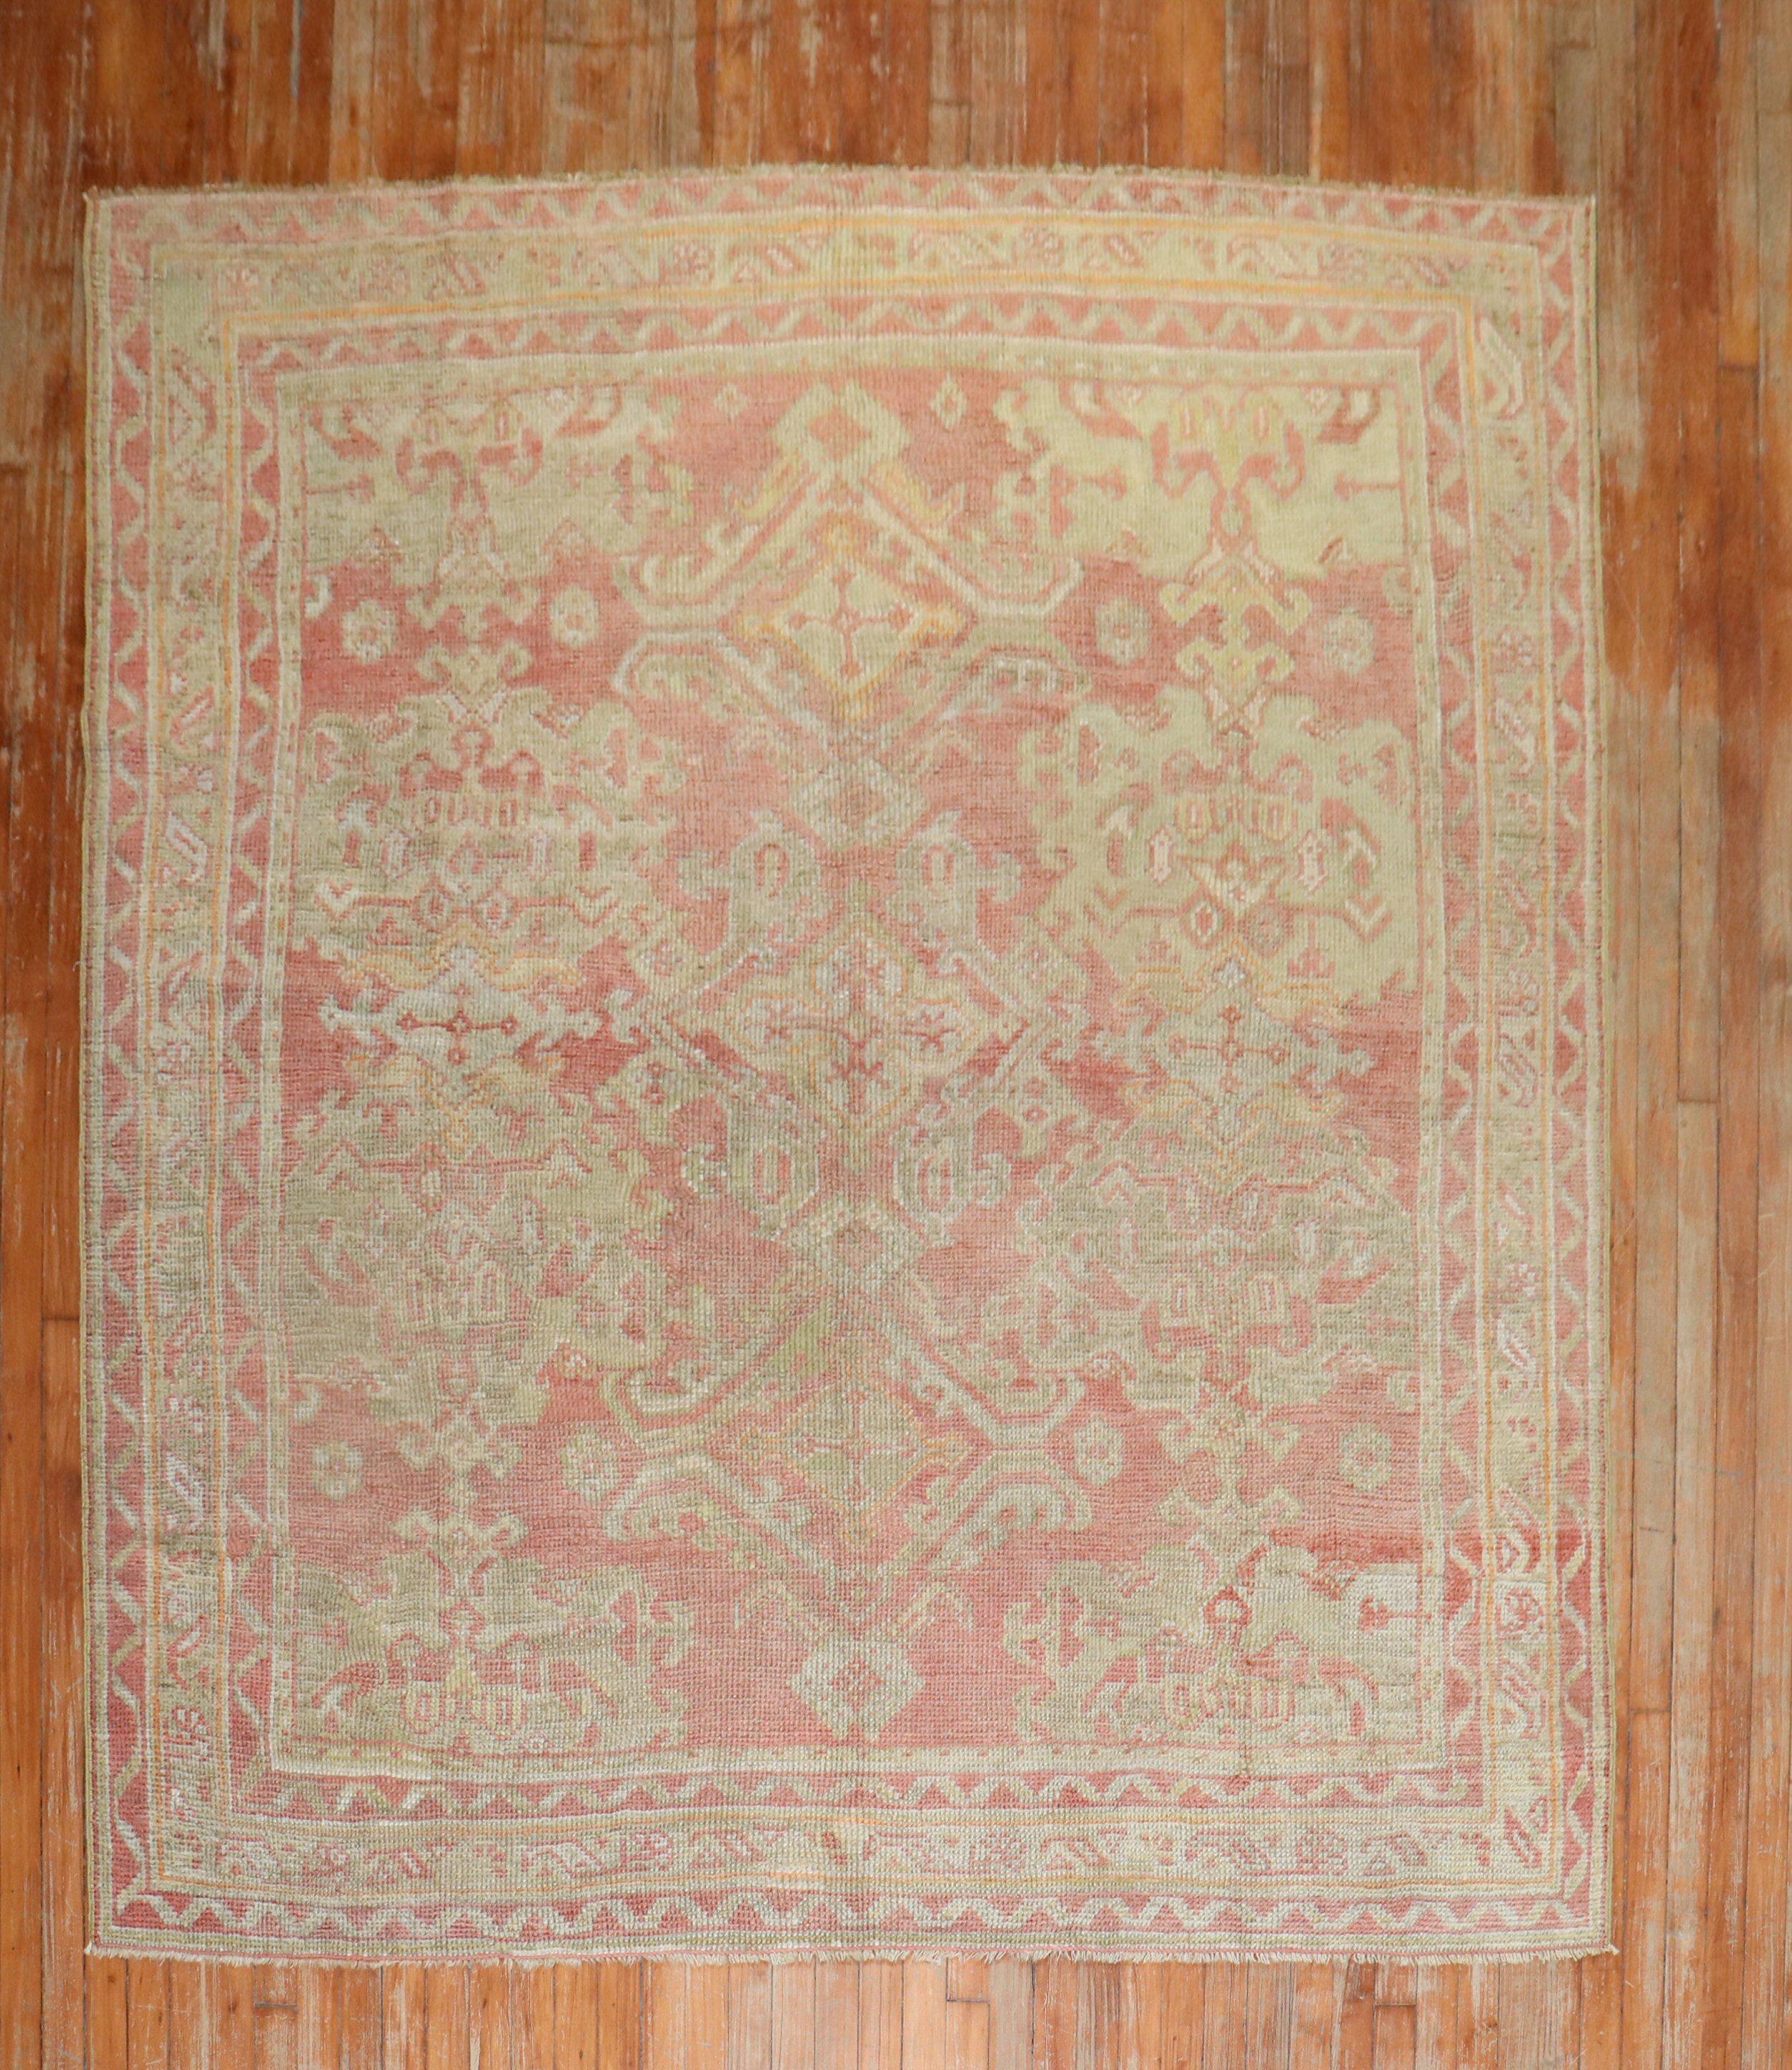 an early 20th-century room square Turkish Oushak Rug

Details
rug no.	j2078
size	6' 9